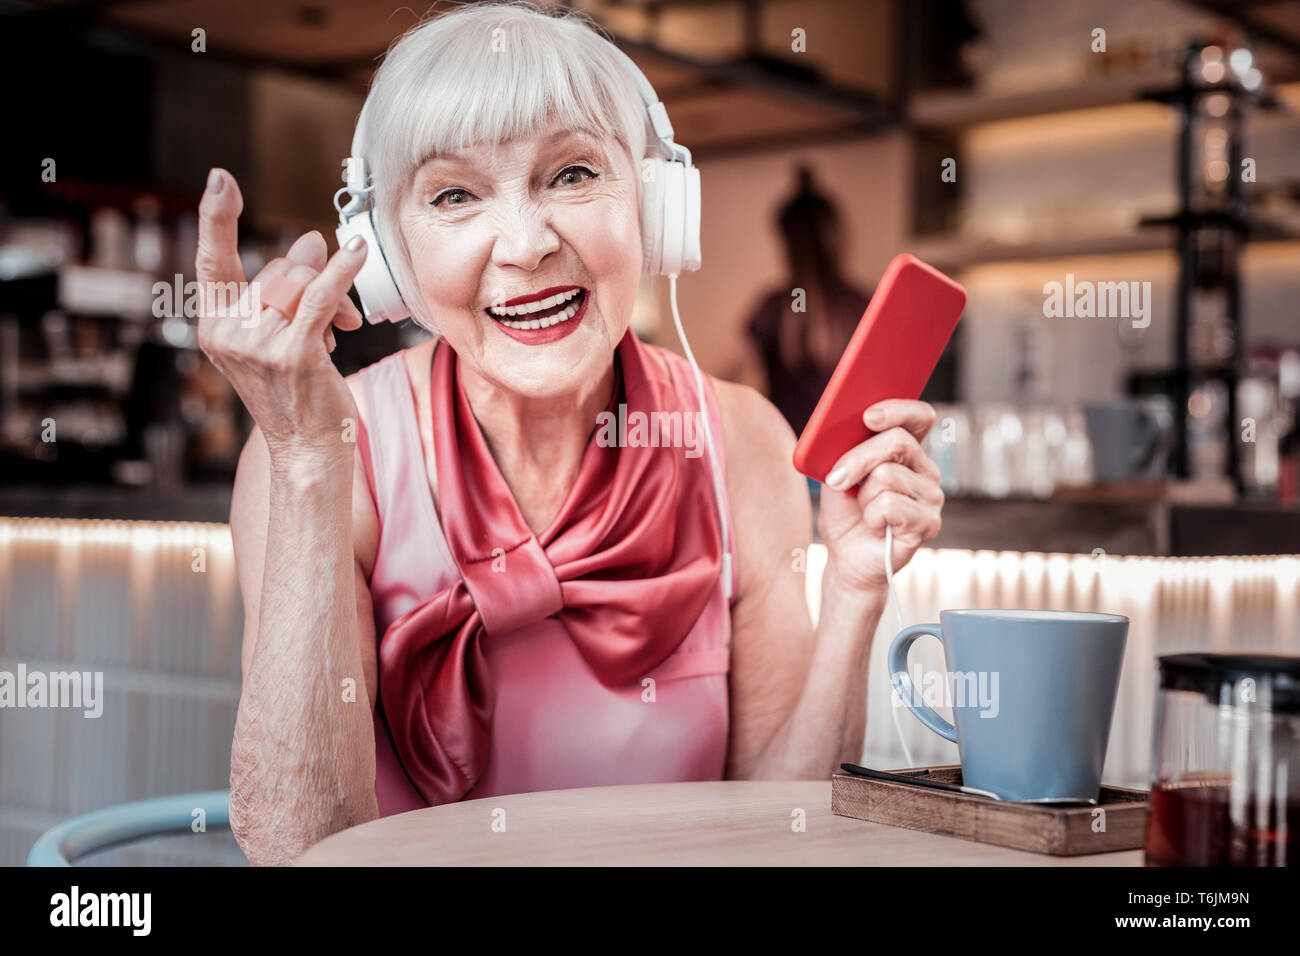 Amused short-haired old woman wearing bright silk top Stock Photo